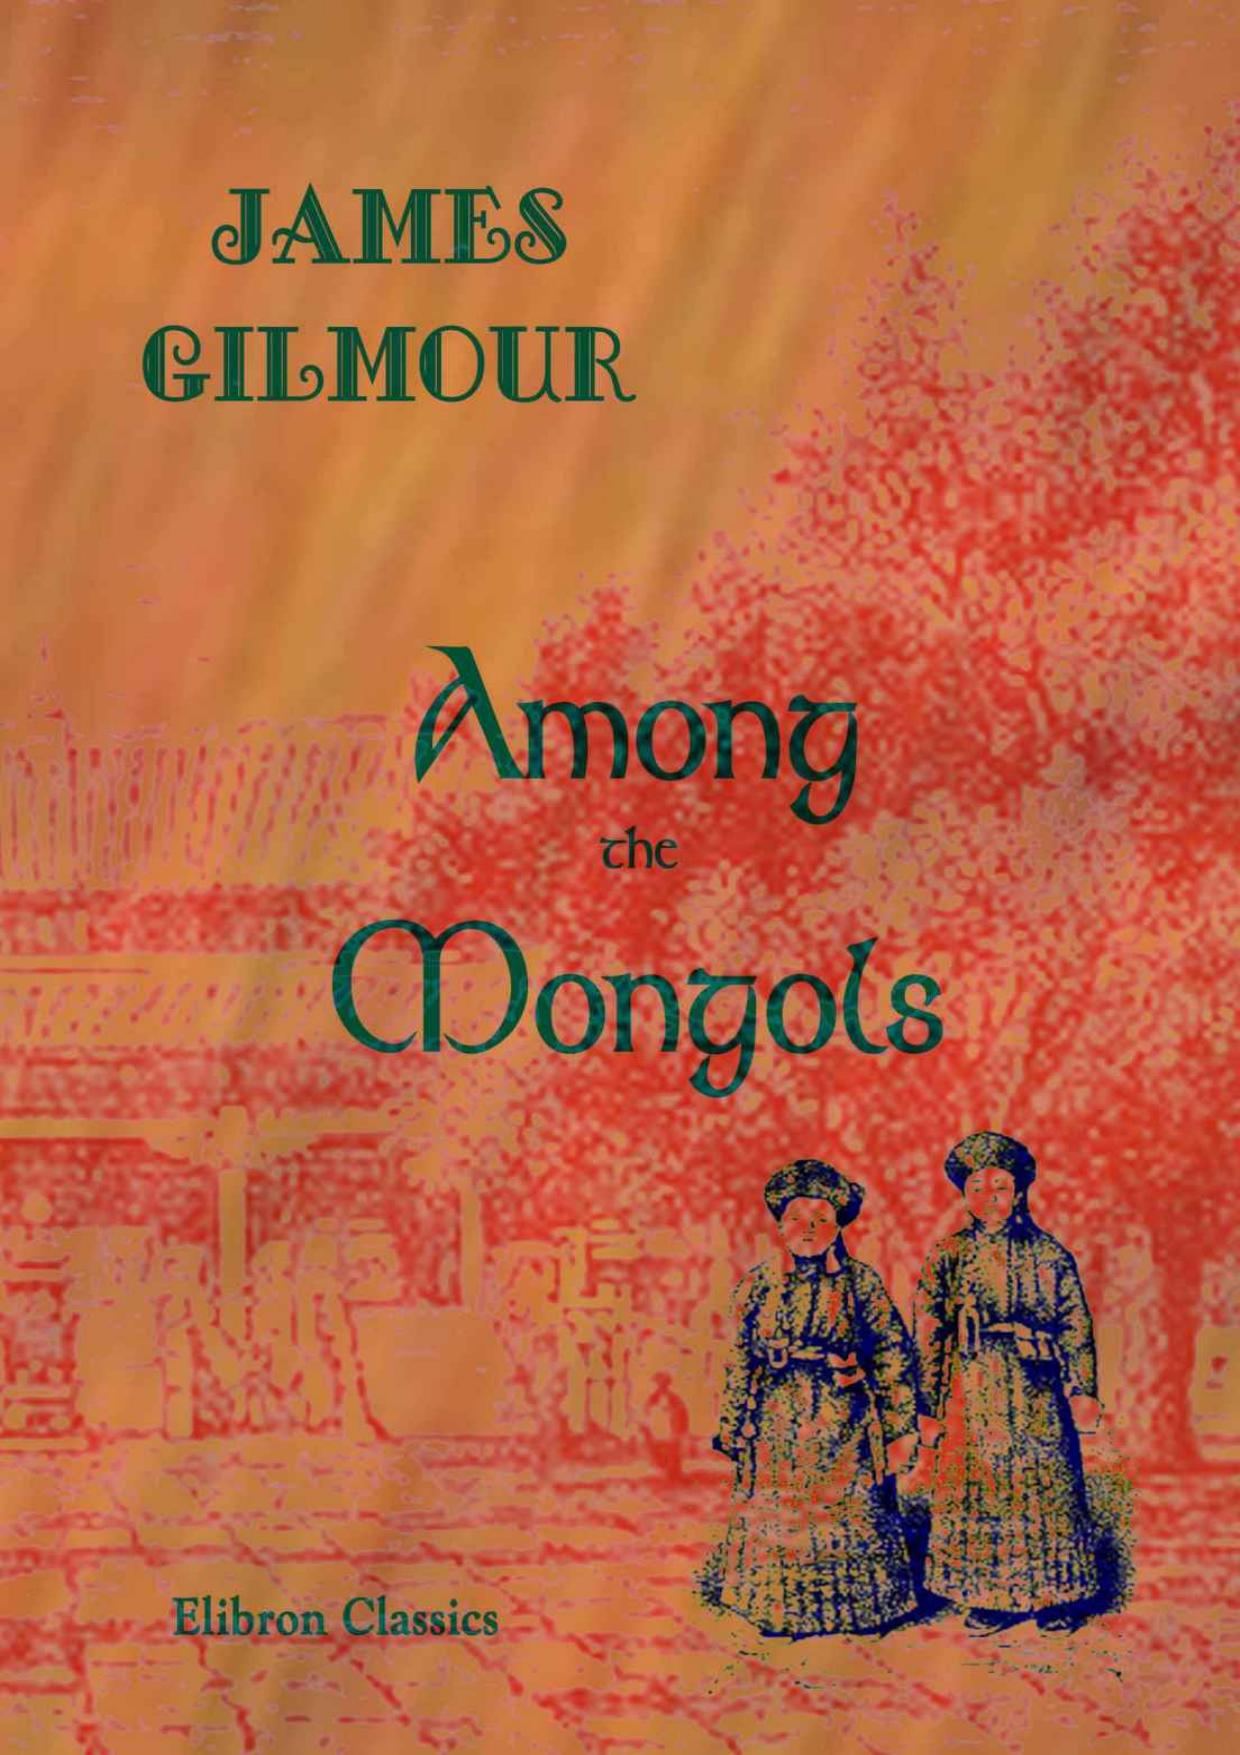 (eBook PDF)Among the Mongols. (Elibron Classics)  by James Gilmour 